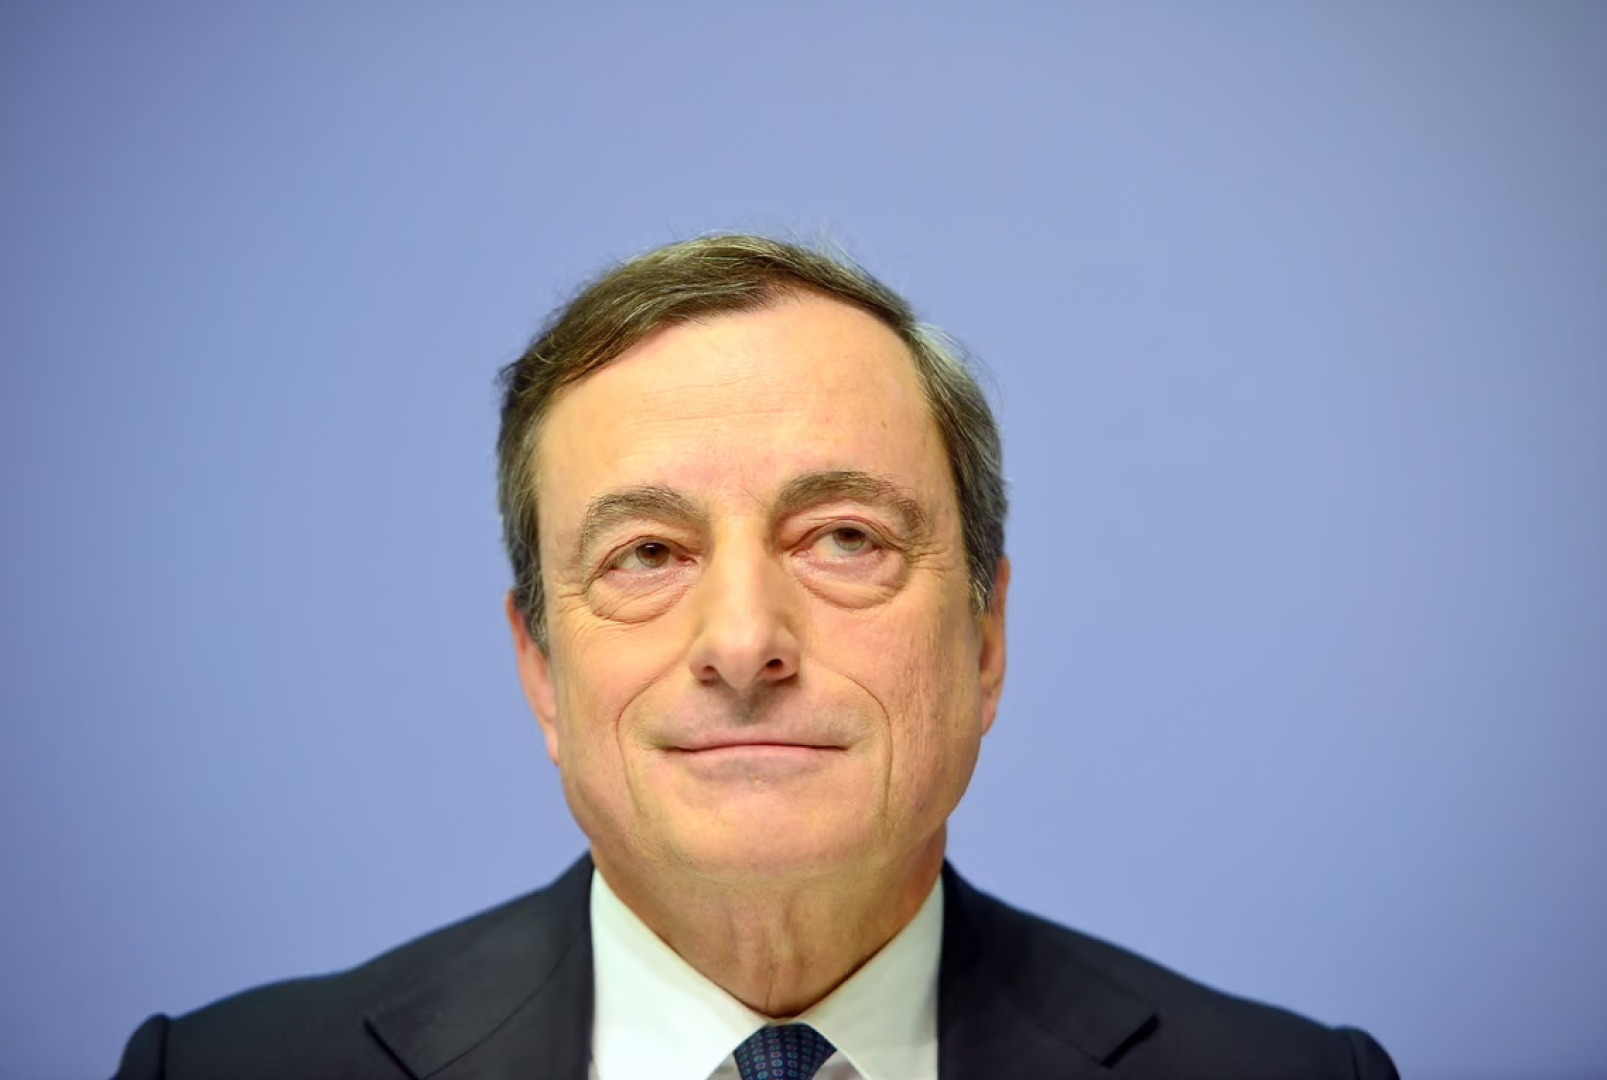 Mario Draghi on a Common Fiscal Policy for the Eurozone